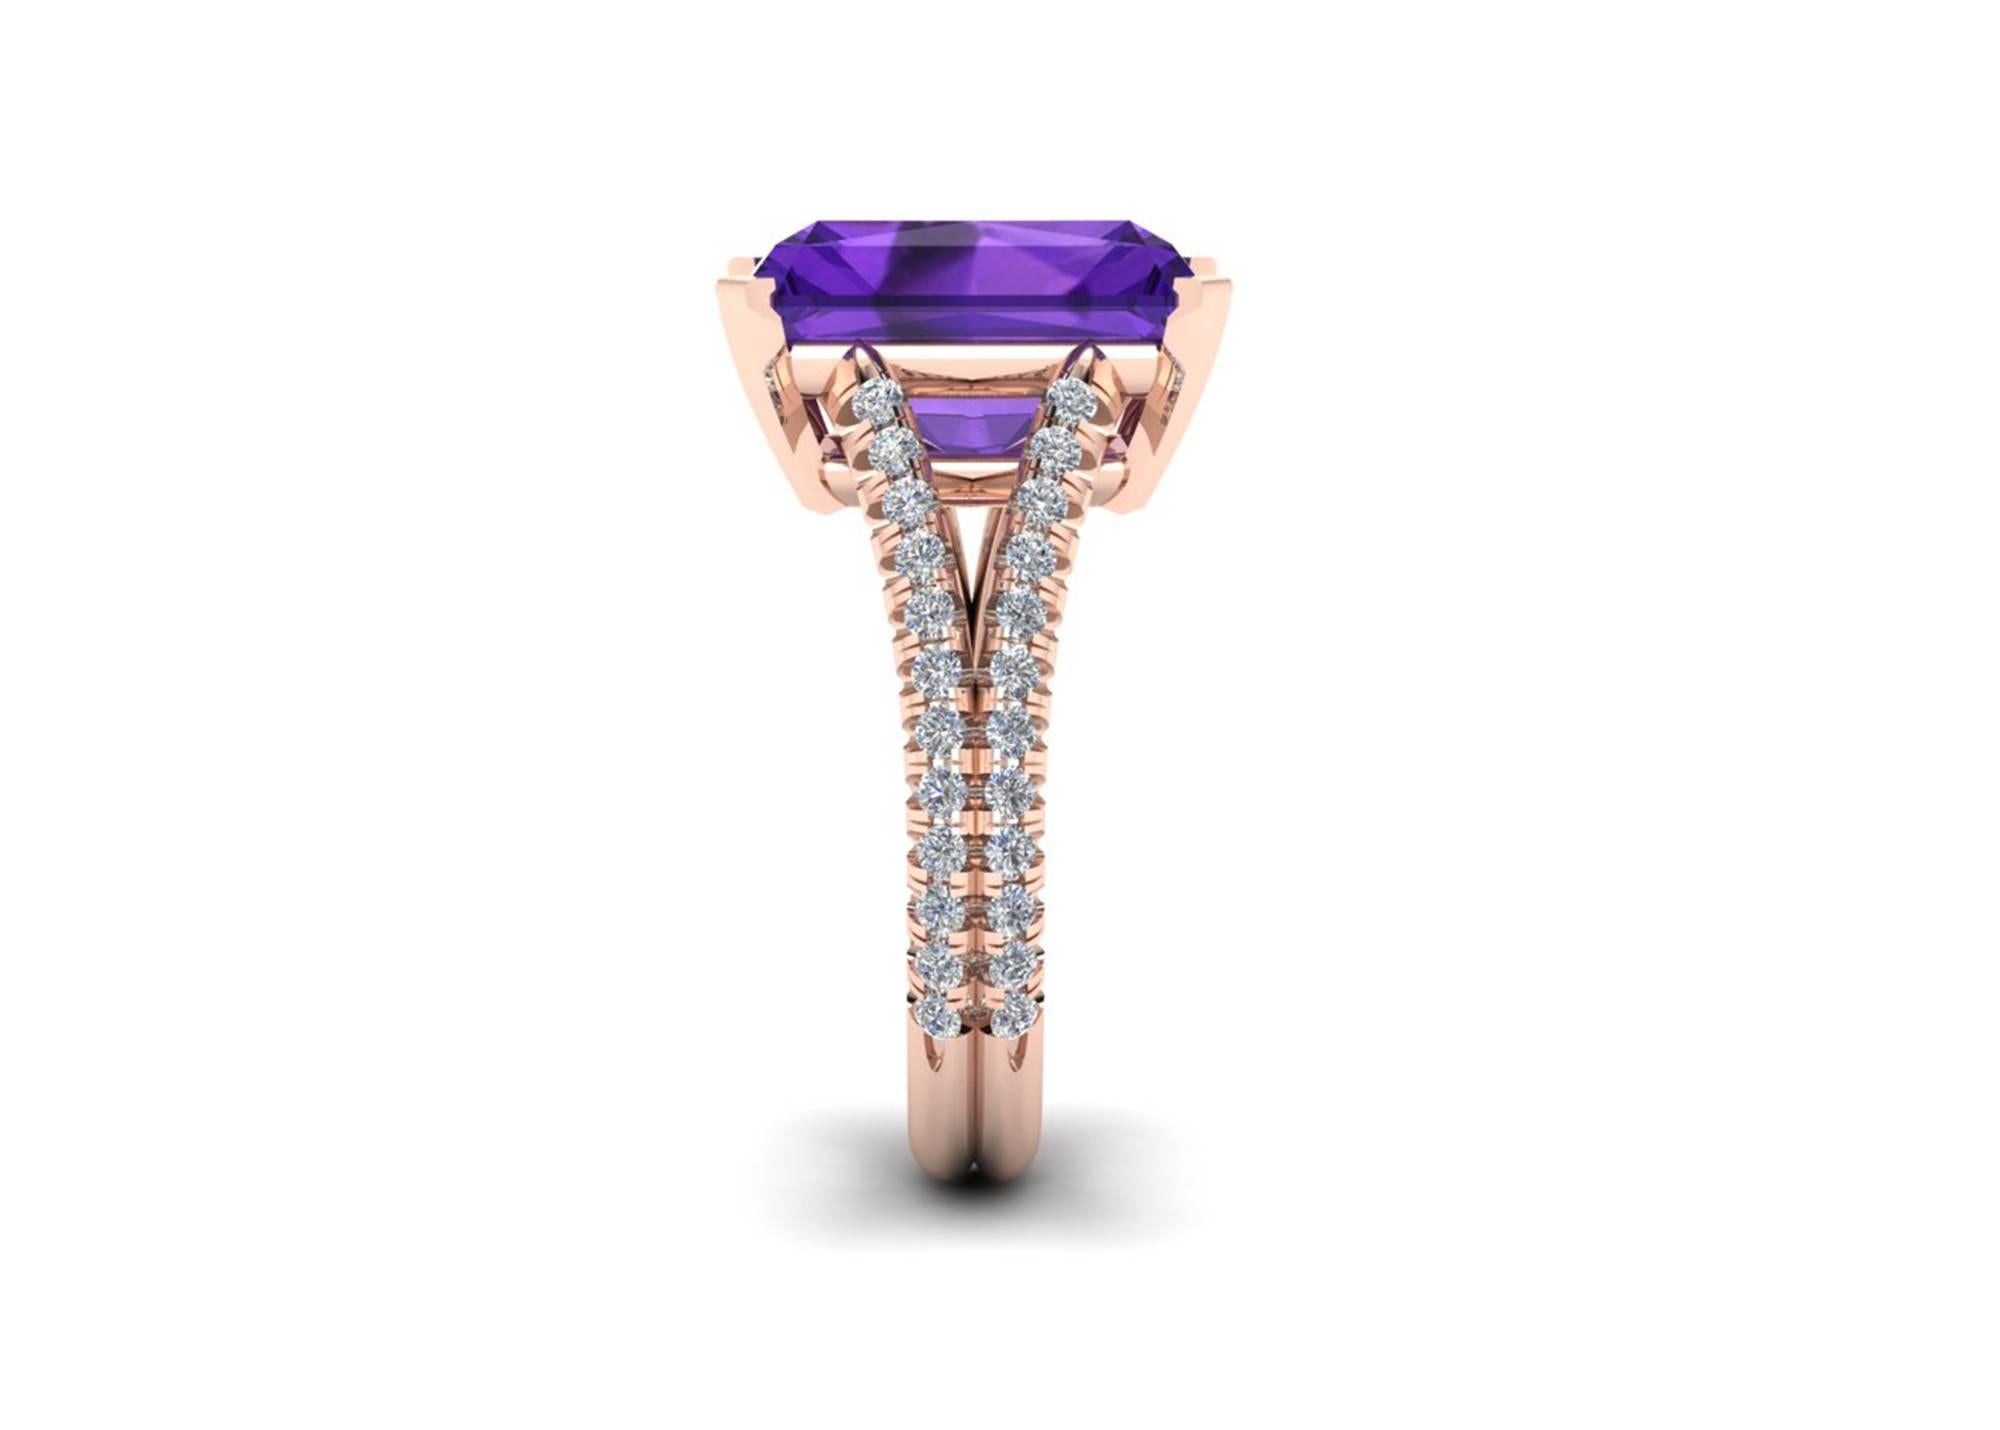 Ferrucci 8.20 carat Amethyst set in 18k rose gold hand made cocktail ring,
with 0.50 carats of white diamonds, hand set by Italian master jeweler, this ring is a size 6 1/2 and we offer complimentary sizing upon order.

A unique stunning piece of